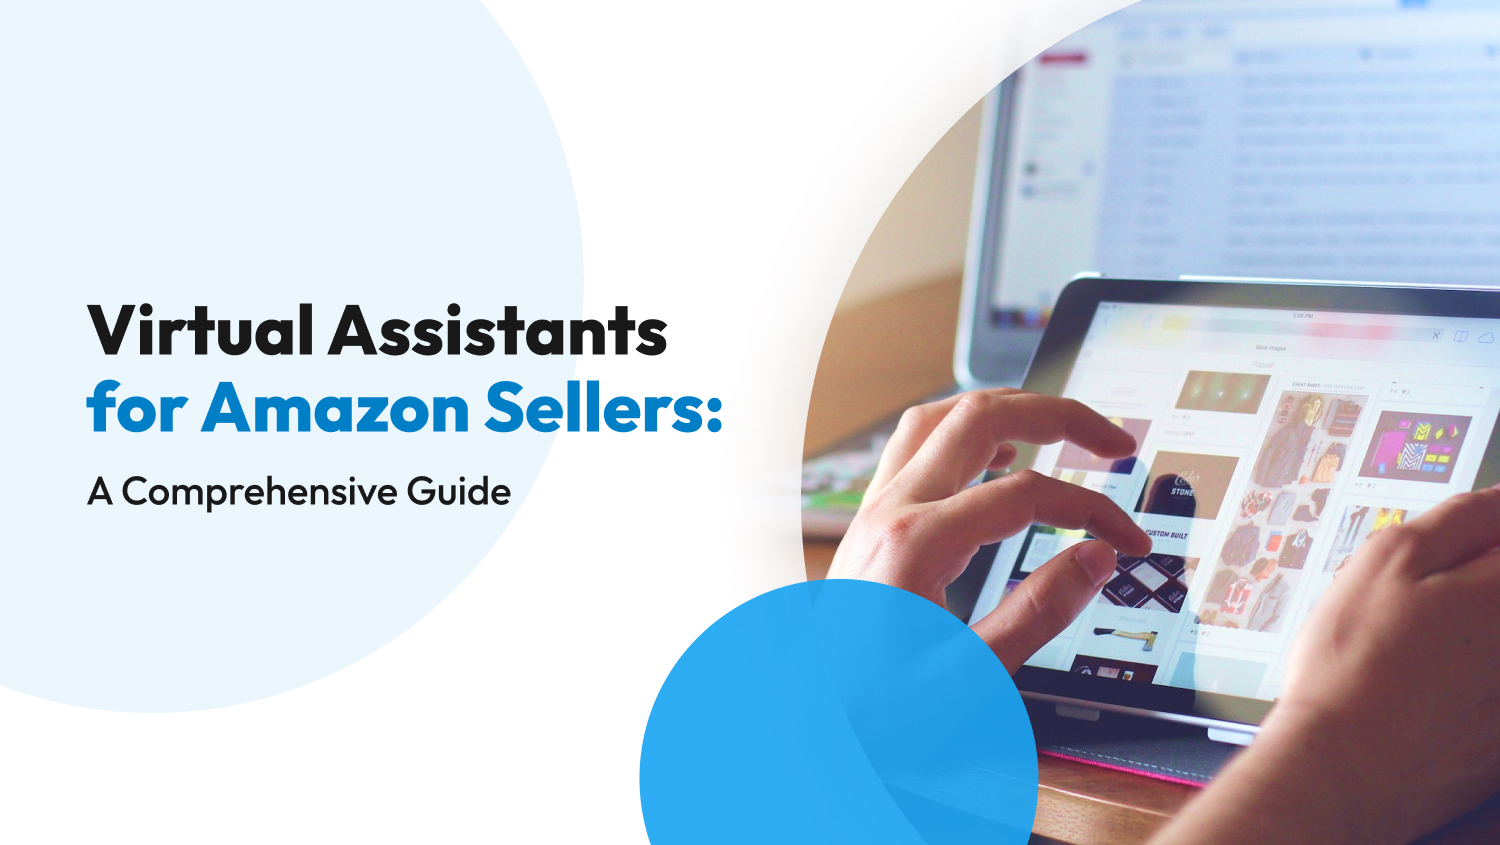 Virtual Assistants for Amazon Sellers: A Comprehensive Guide